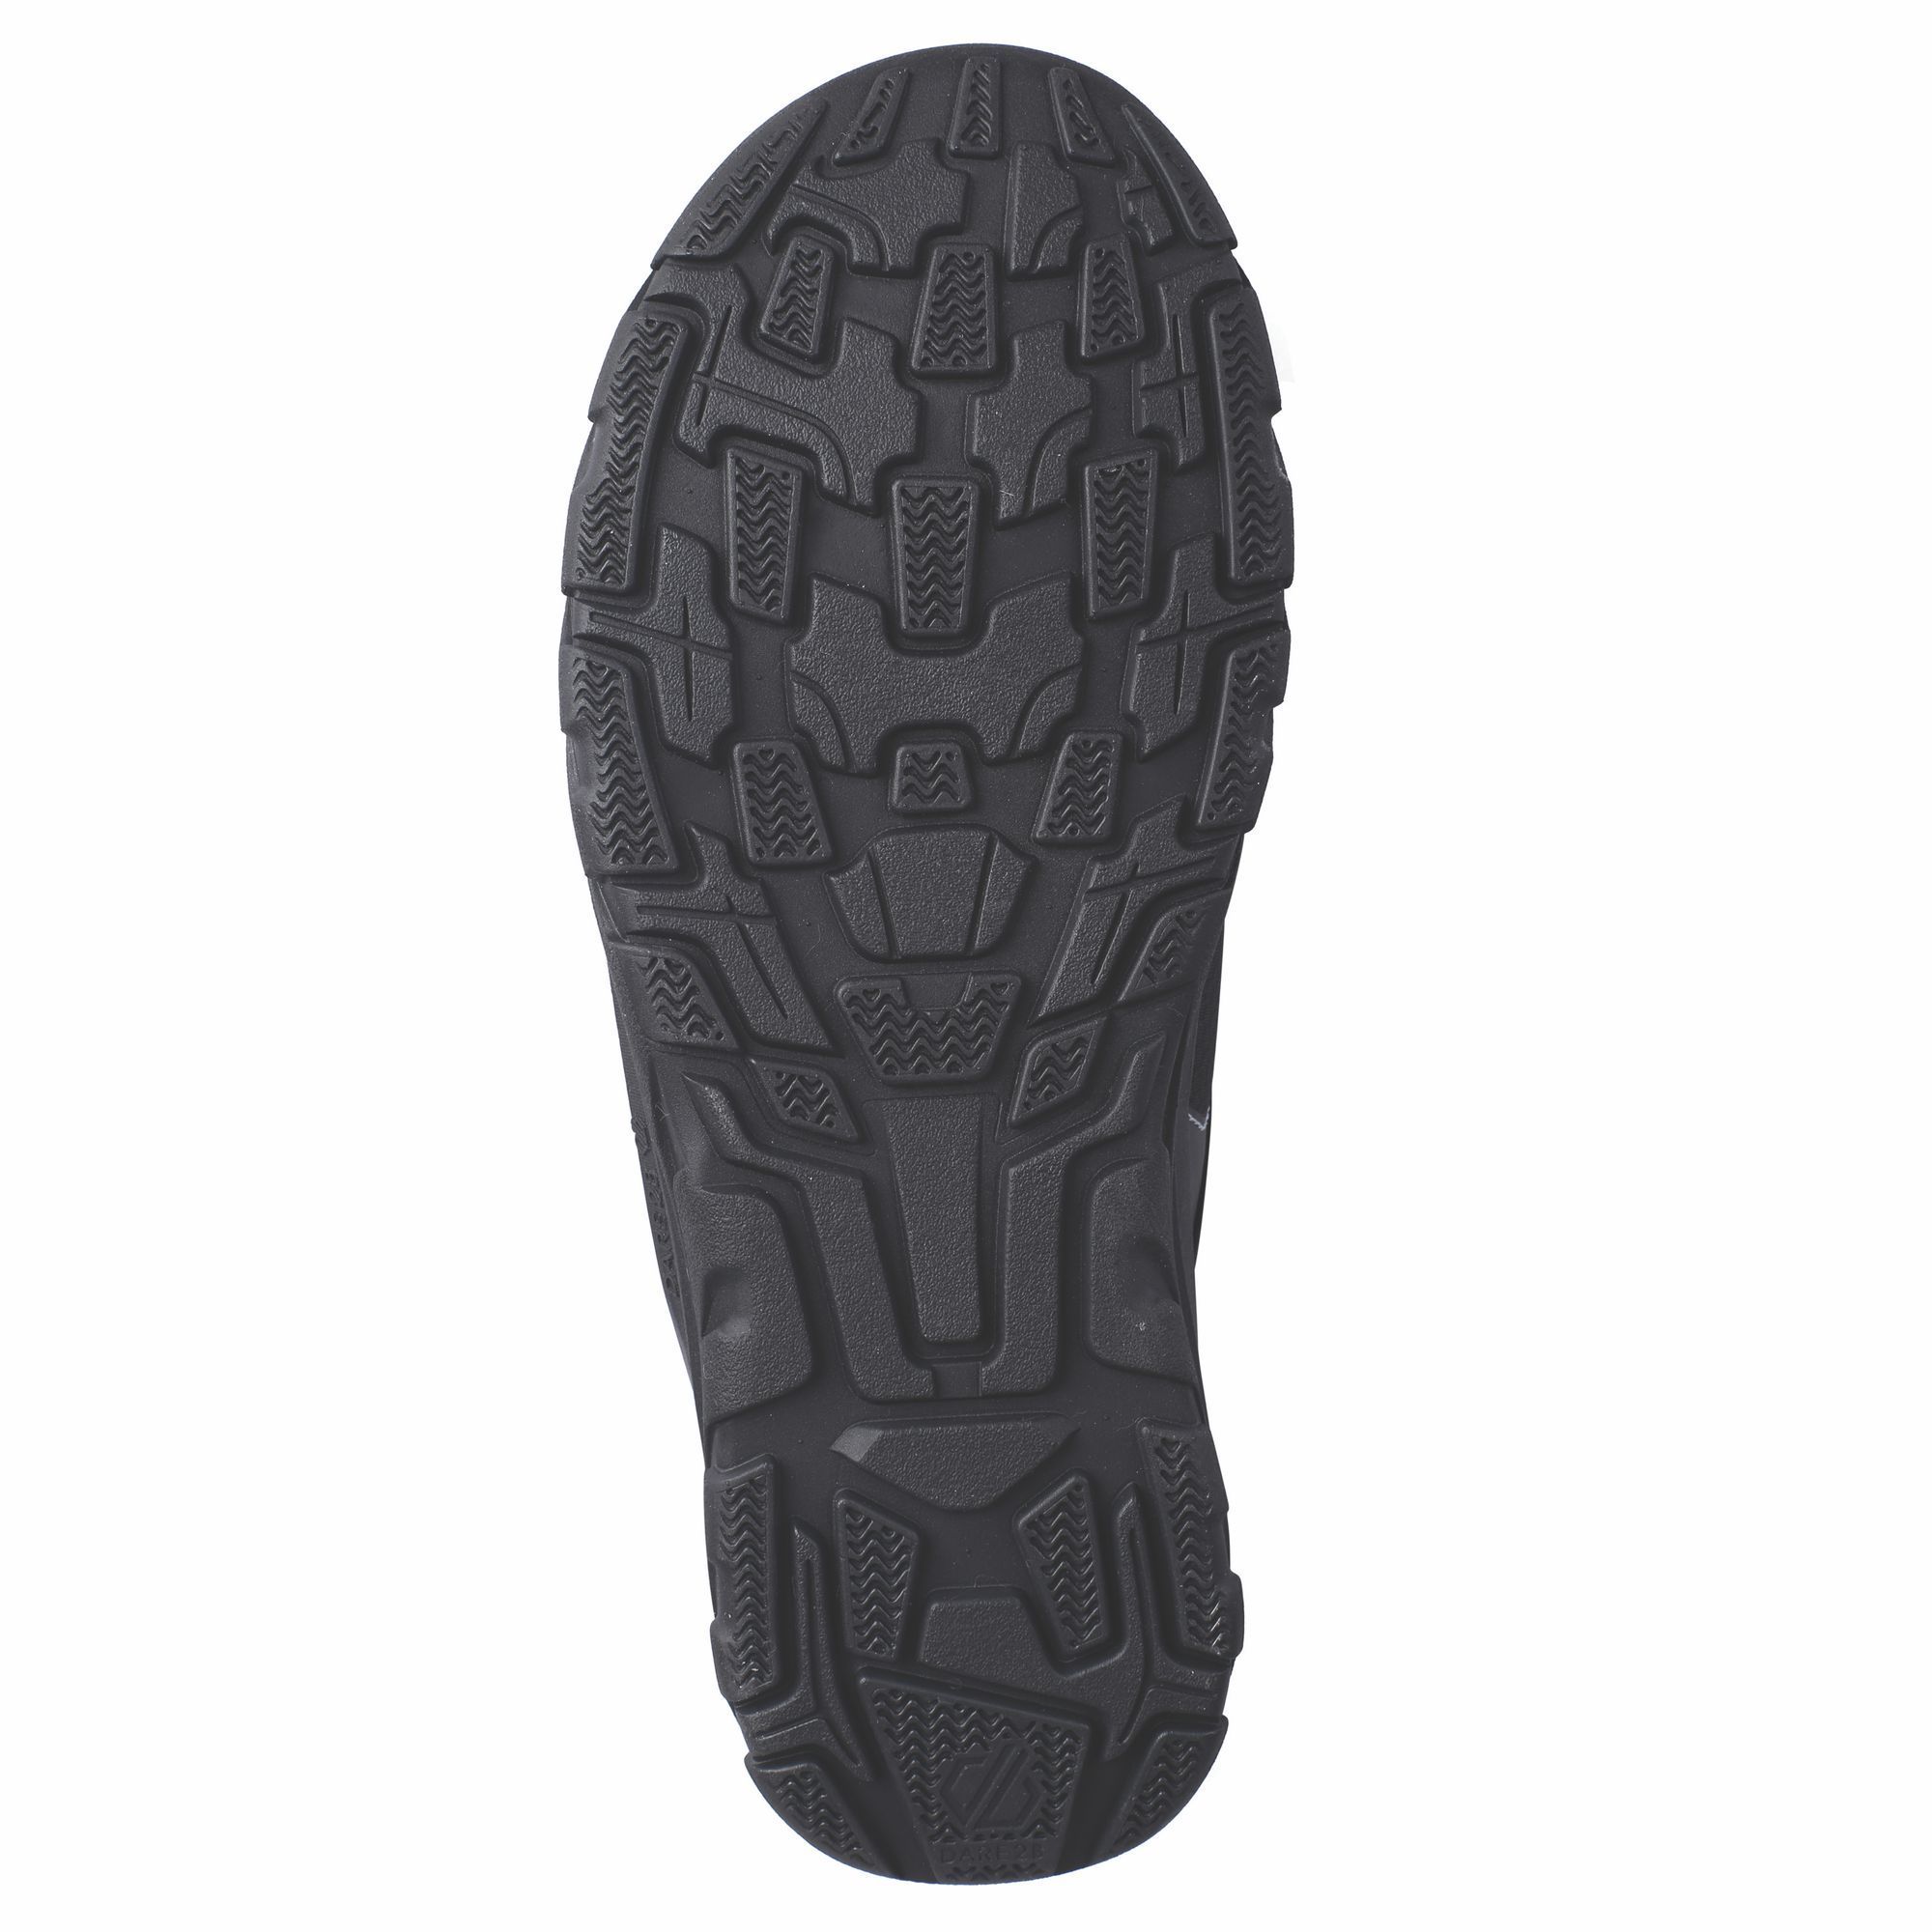 65% Polyester, 35% Polyurathane. Lightweight mesh upper with PU overlays for a balance of breathability and support. Toe post design for easy on/off. Lightweight EVA bottom unit with rubber pods for a perfect balance of lightweight traction.